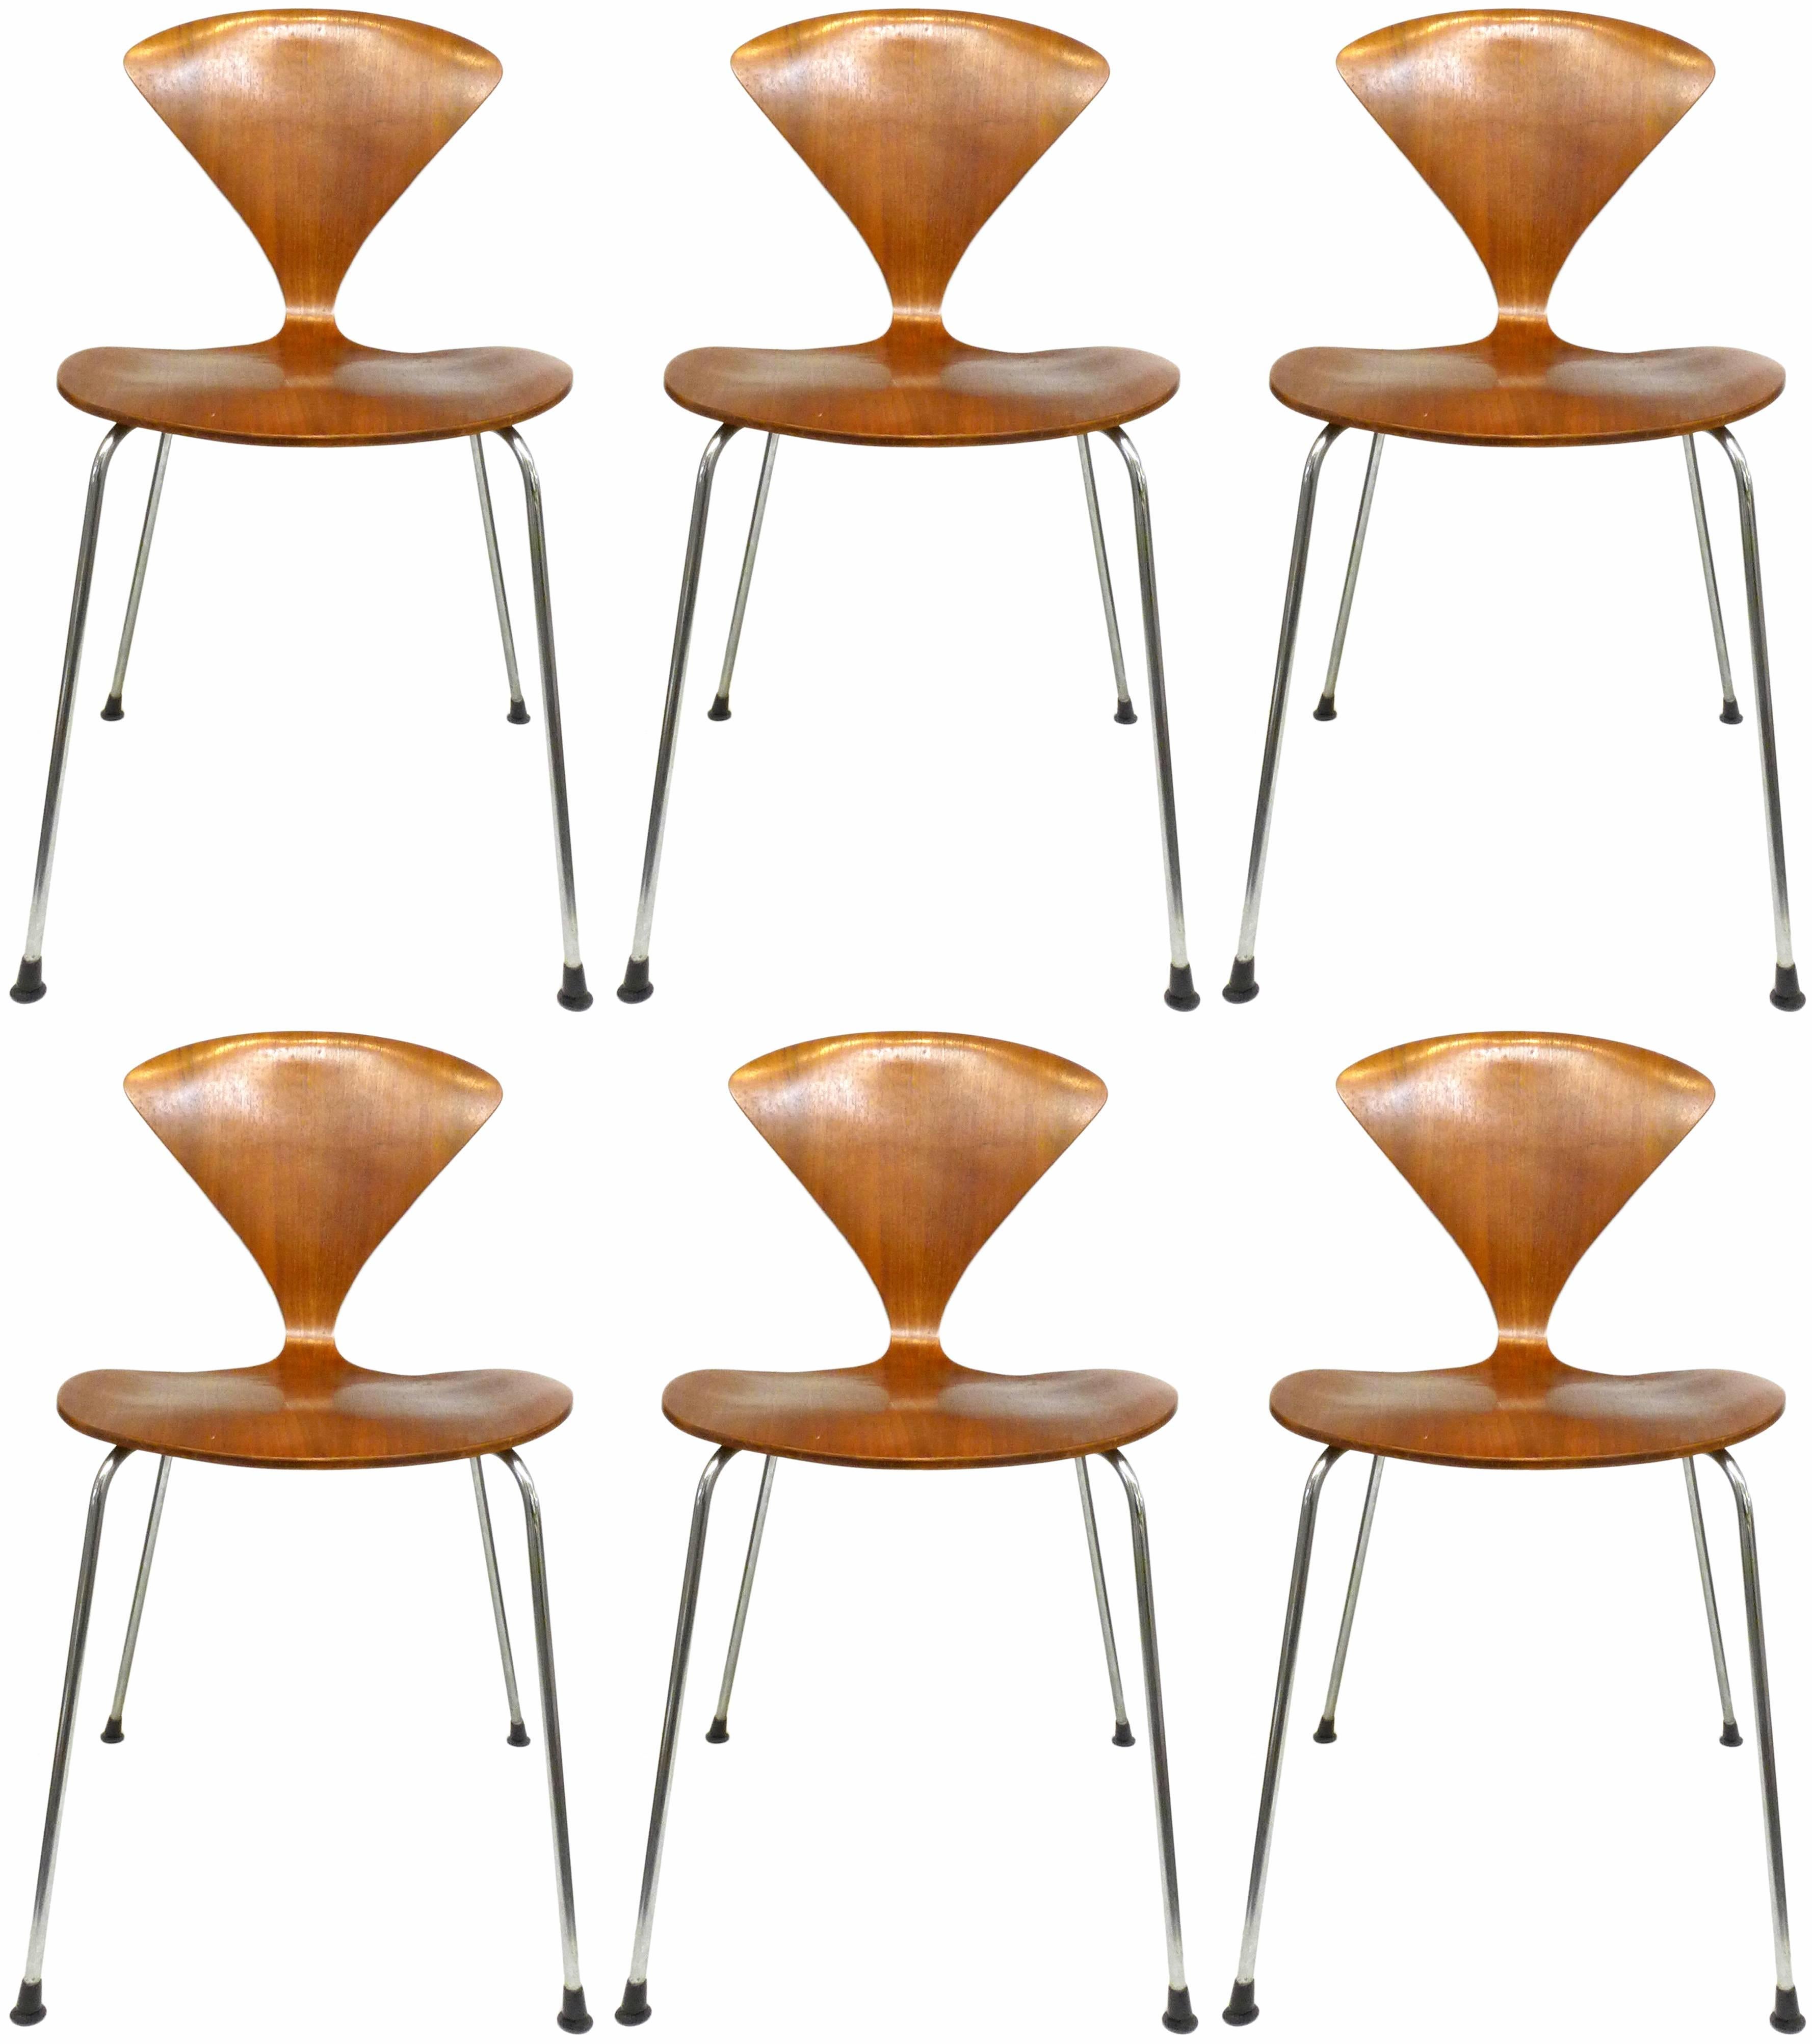 A fantastic set of six vintage, metal-leg, stacking "Cherner Chairs" by Norman Cherner for Plycraft. A mainstay of mid-century design collections, including the Vitra Design Museum, a wonderfully-dramatic, molded-plywood seat on a slender,